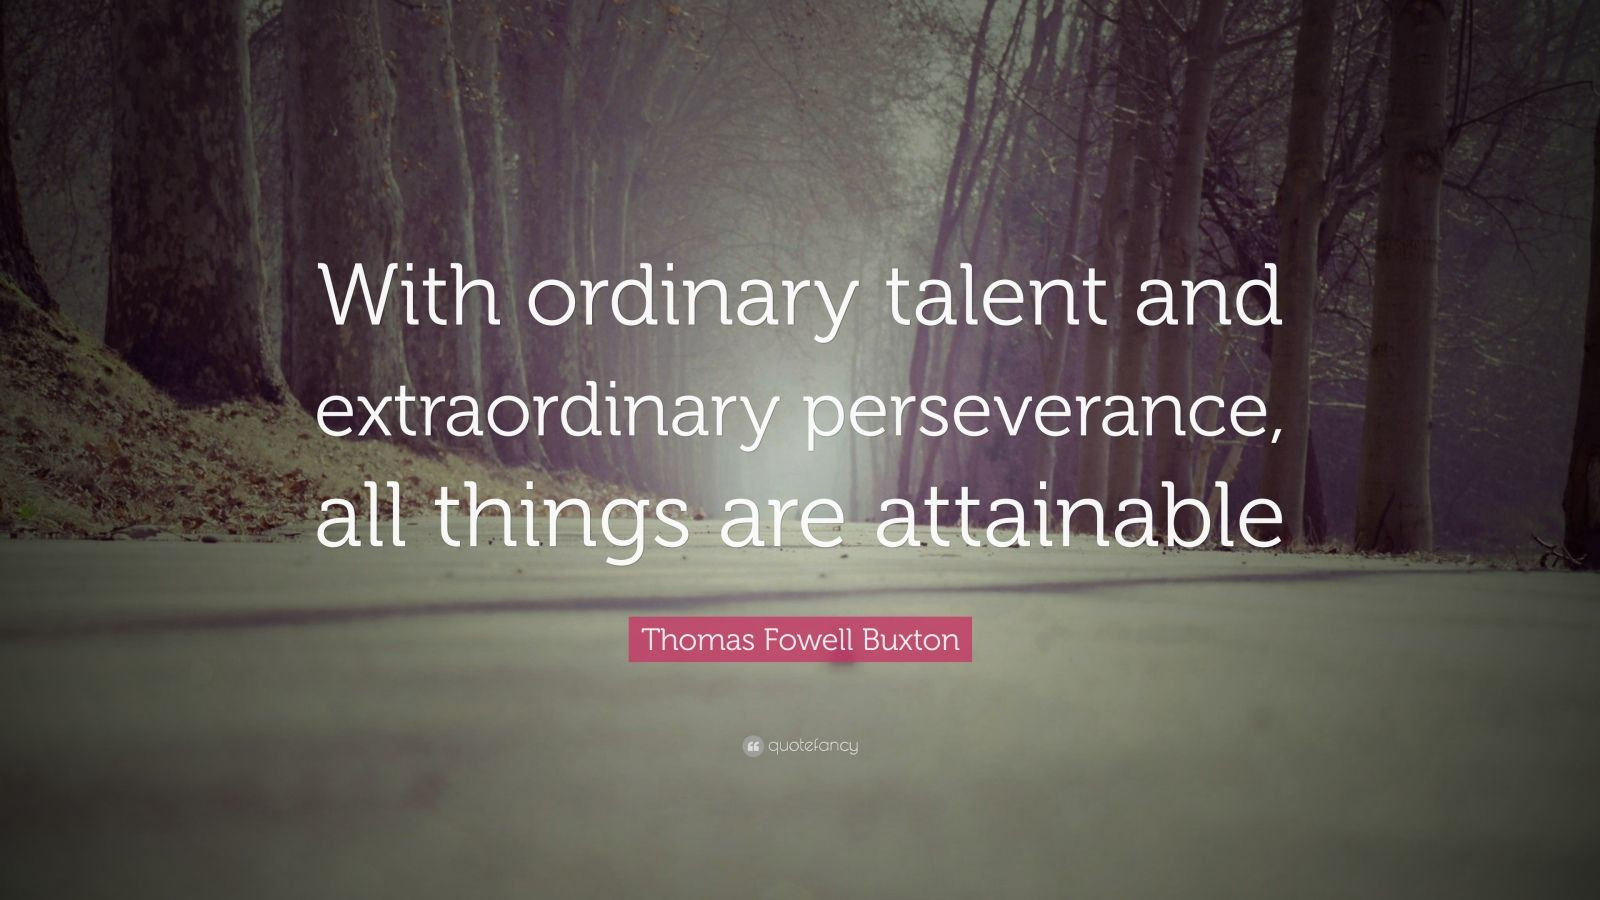 Inspirational Quotes About Perserverance
 Persistence Quotes 50 wallpapers Quotefancy